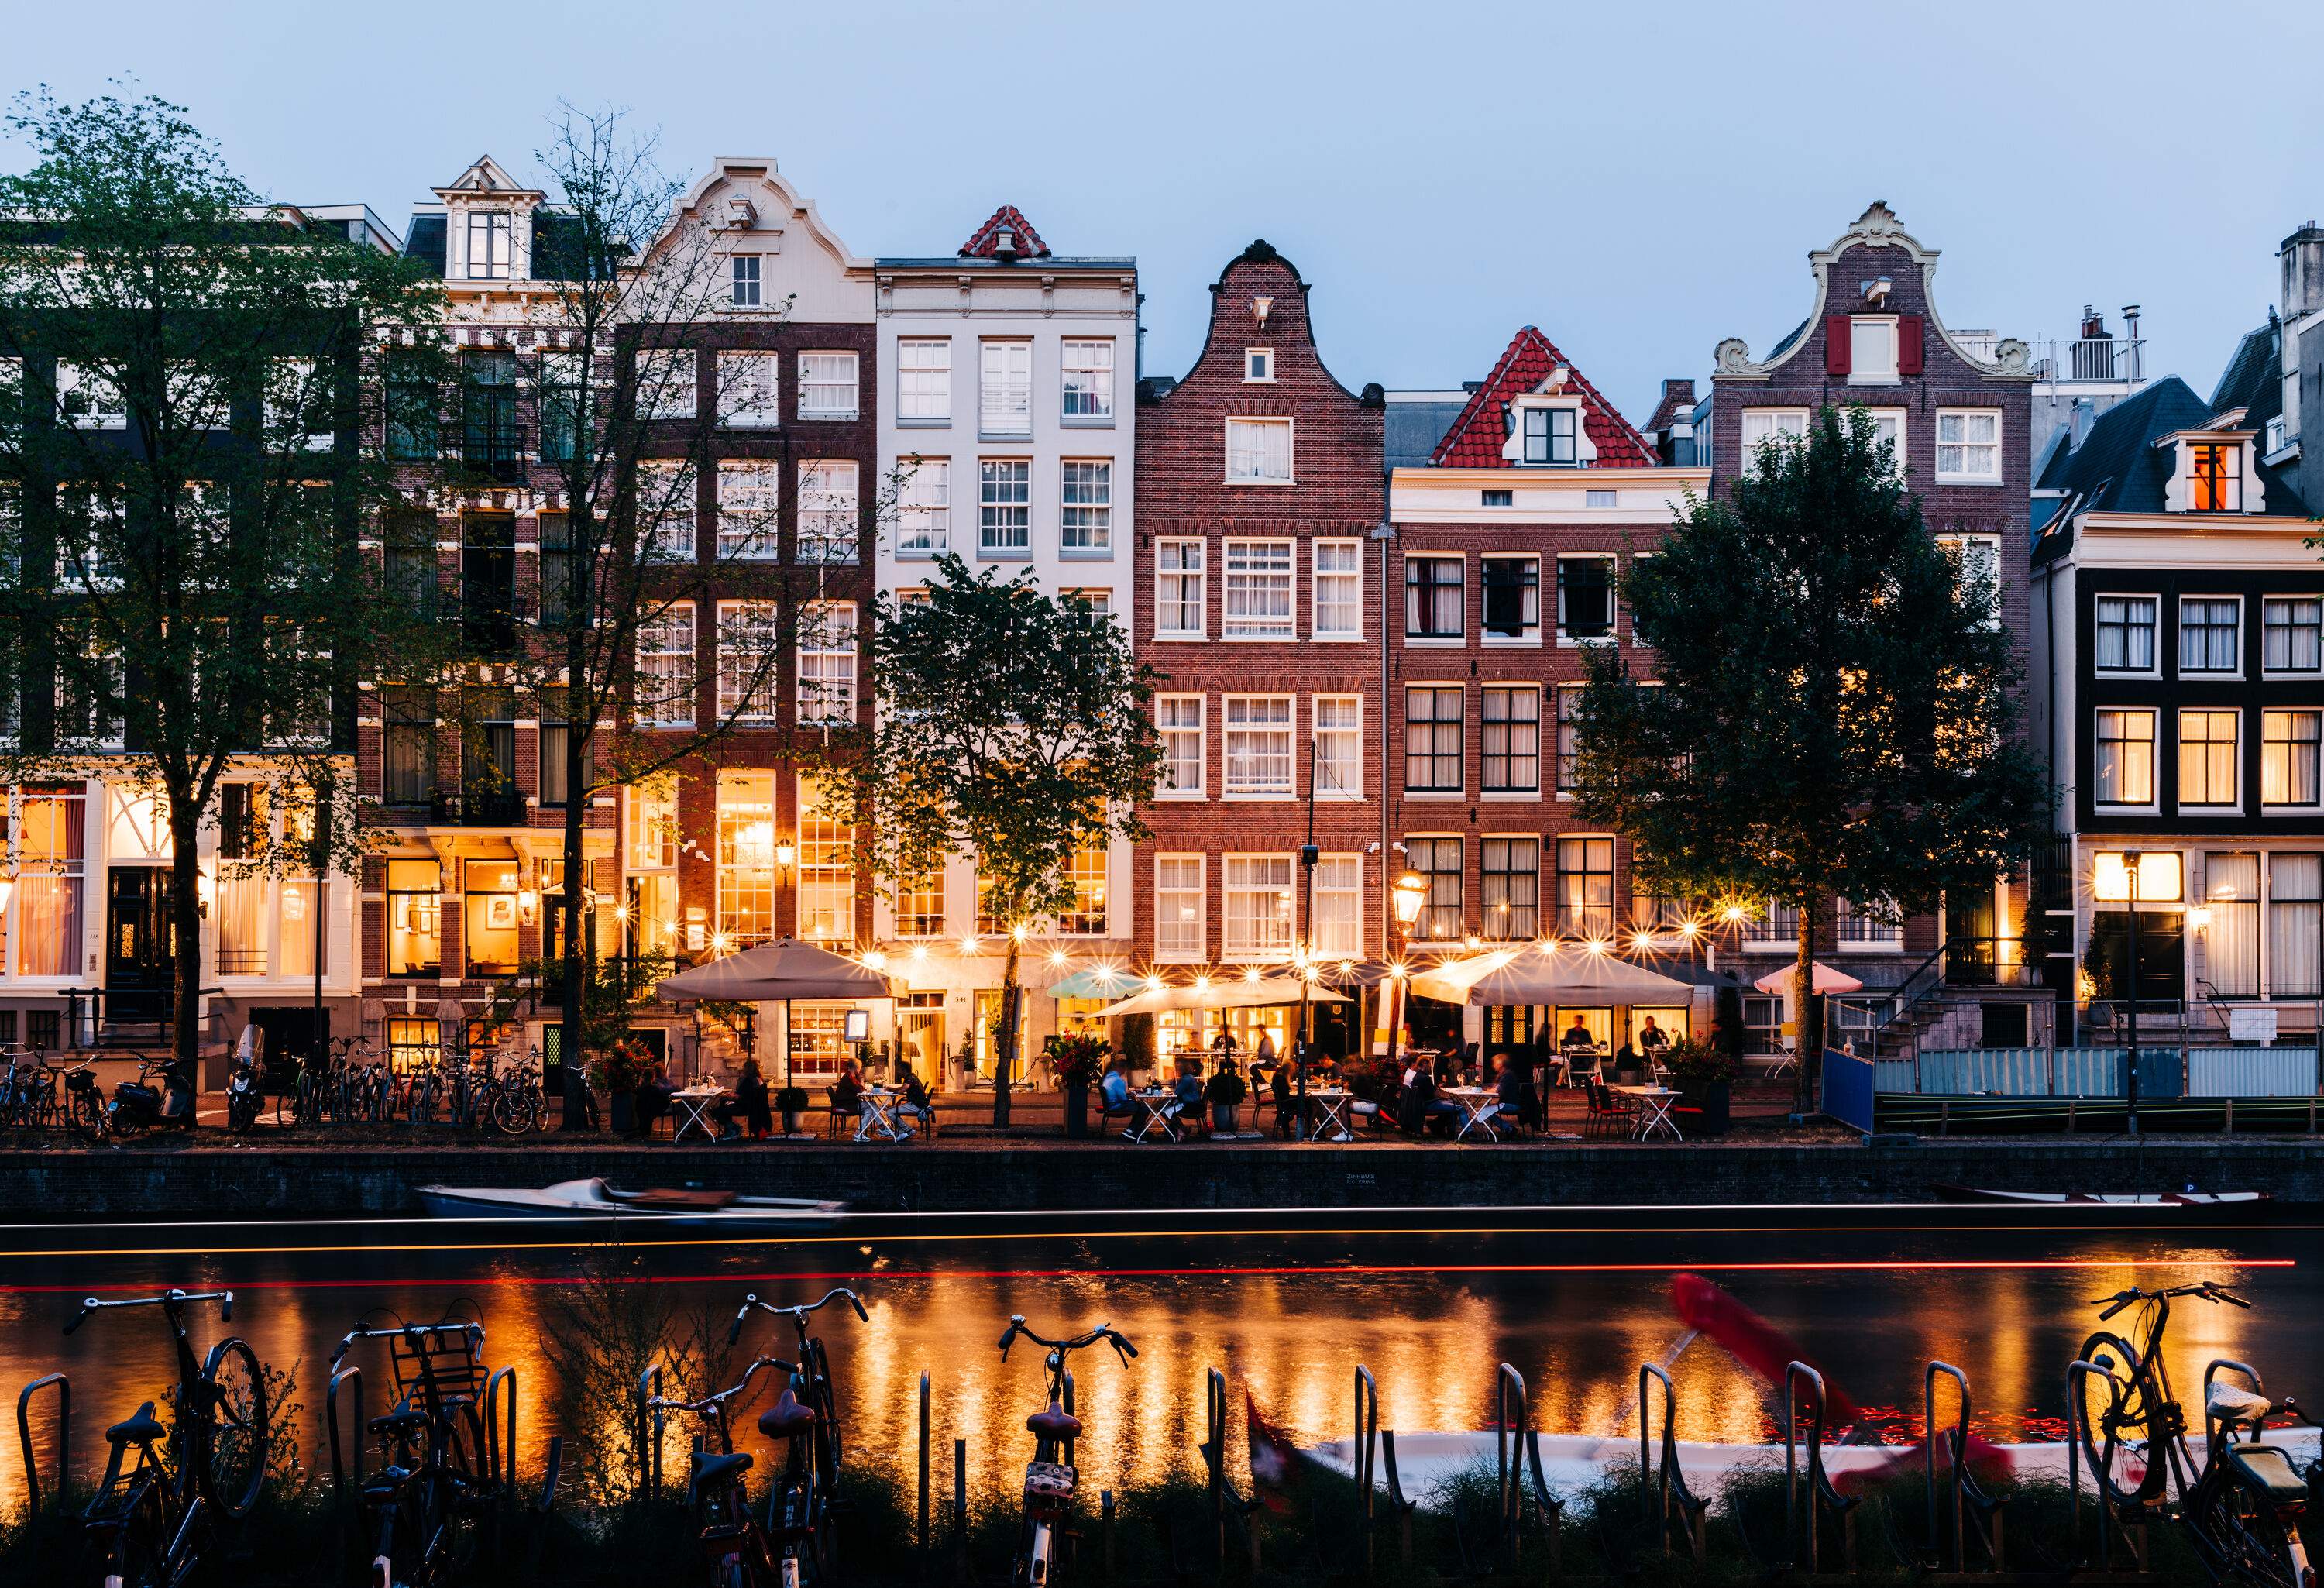 People dine by the river next to traditional tall, narrow, brightly lit Amsterdam canal houses.